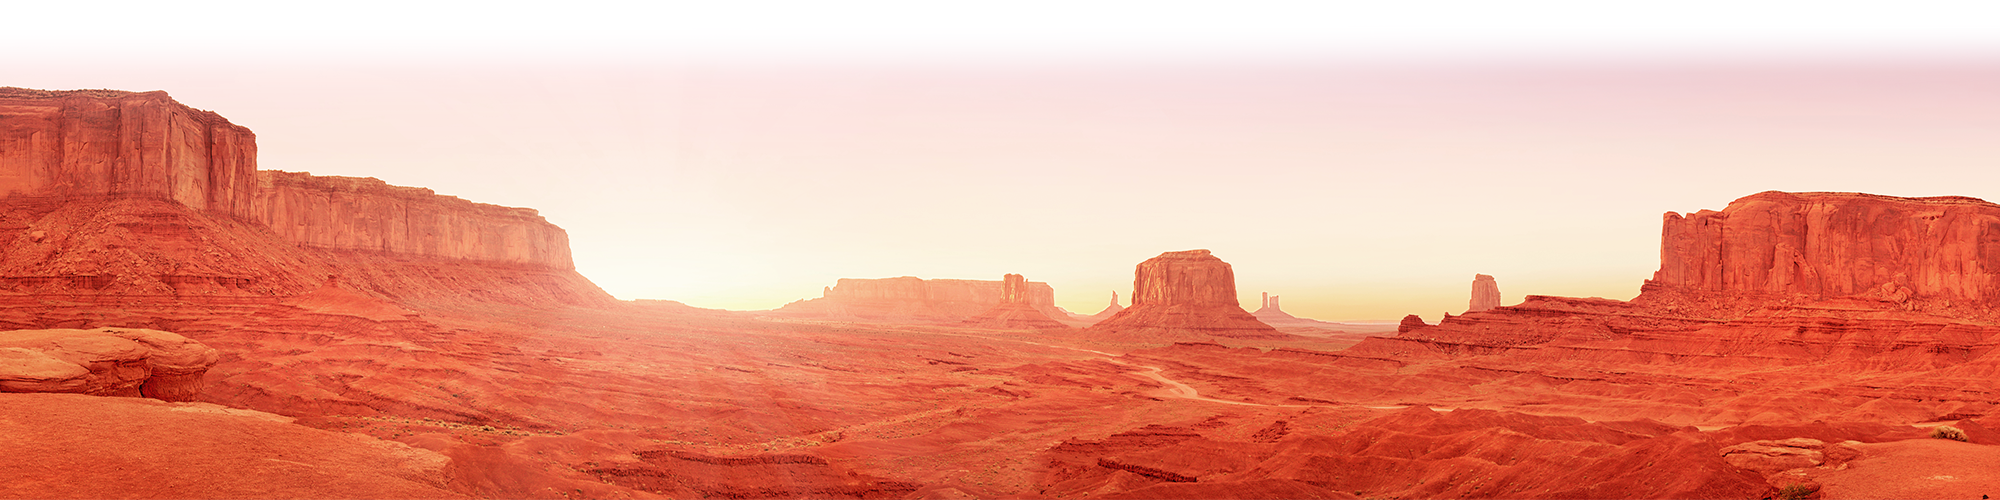 Background image of monument valley